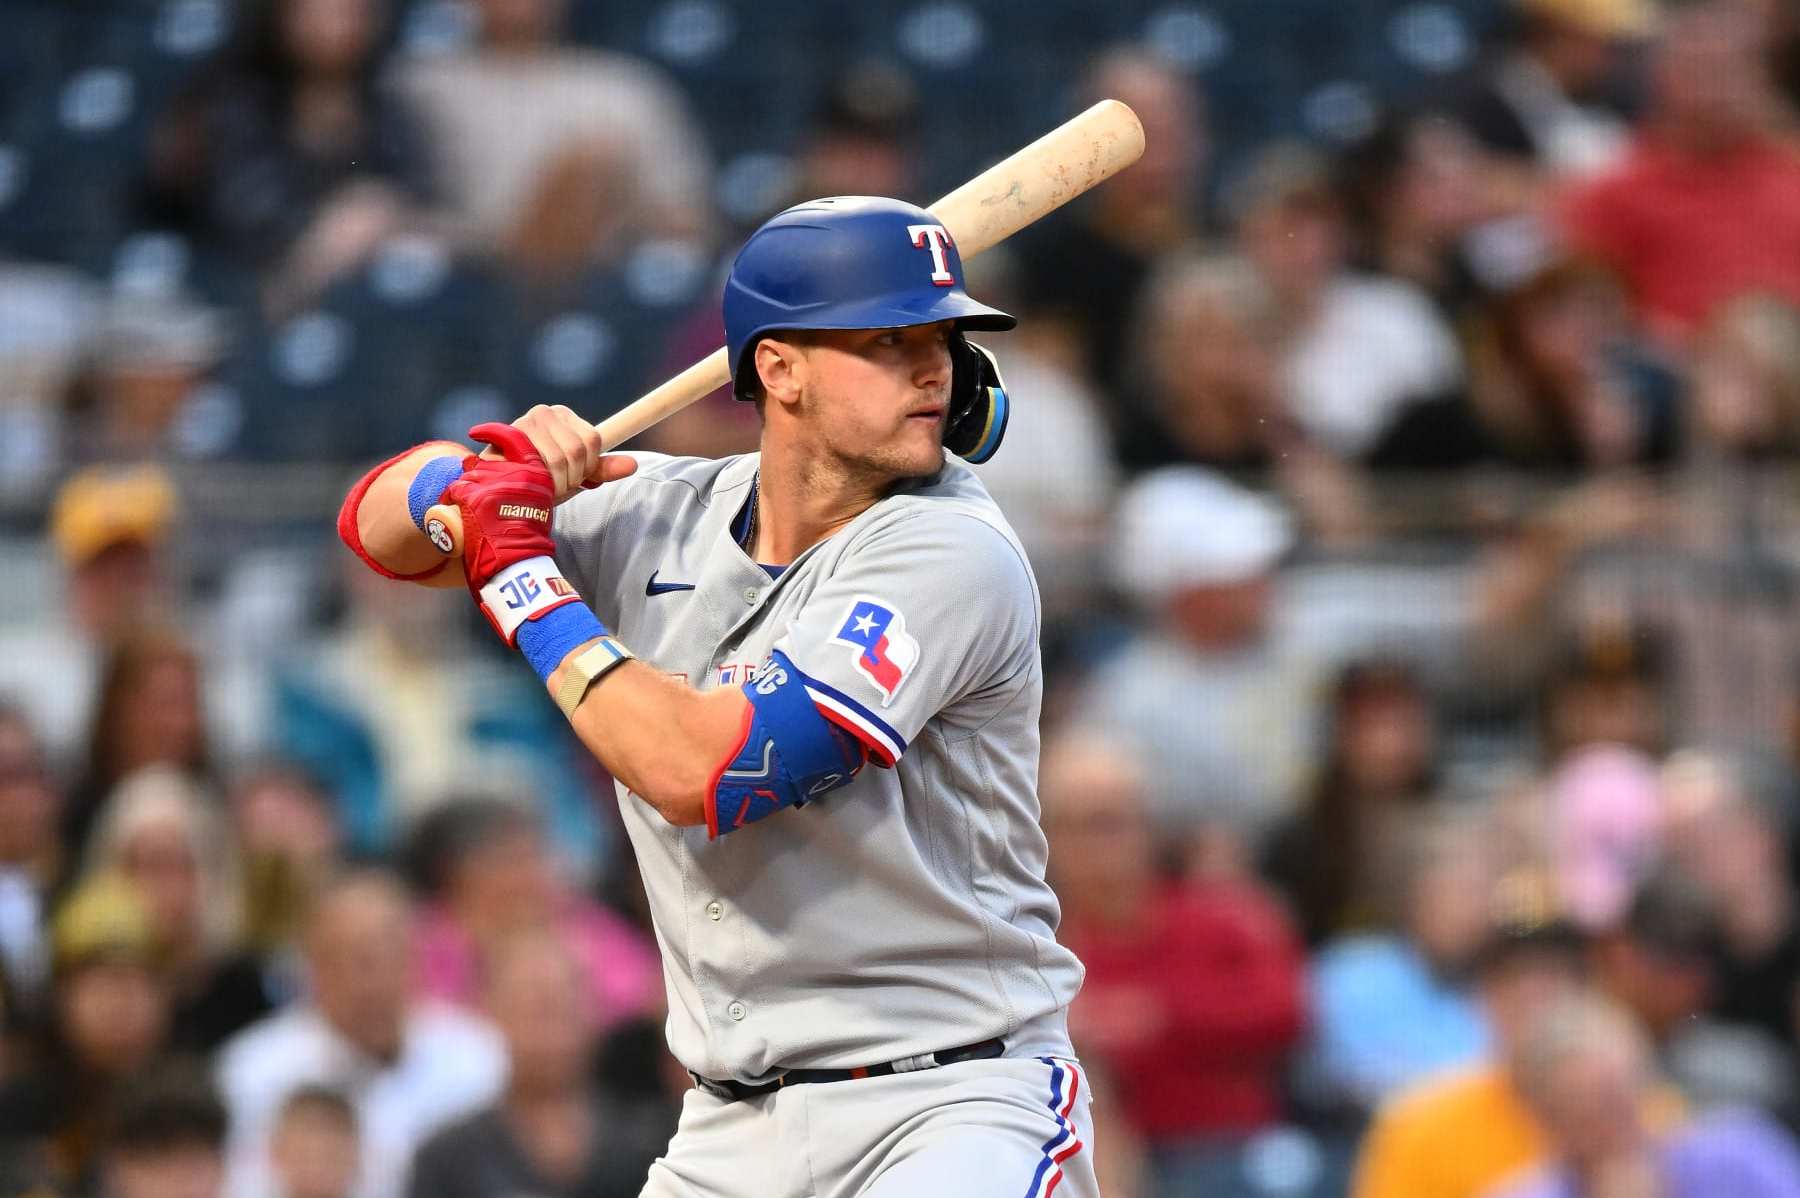 Who is Josh Jung? Rangers 3B hits HR in 1st at bat